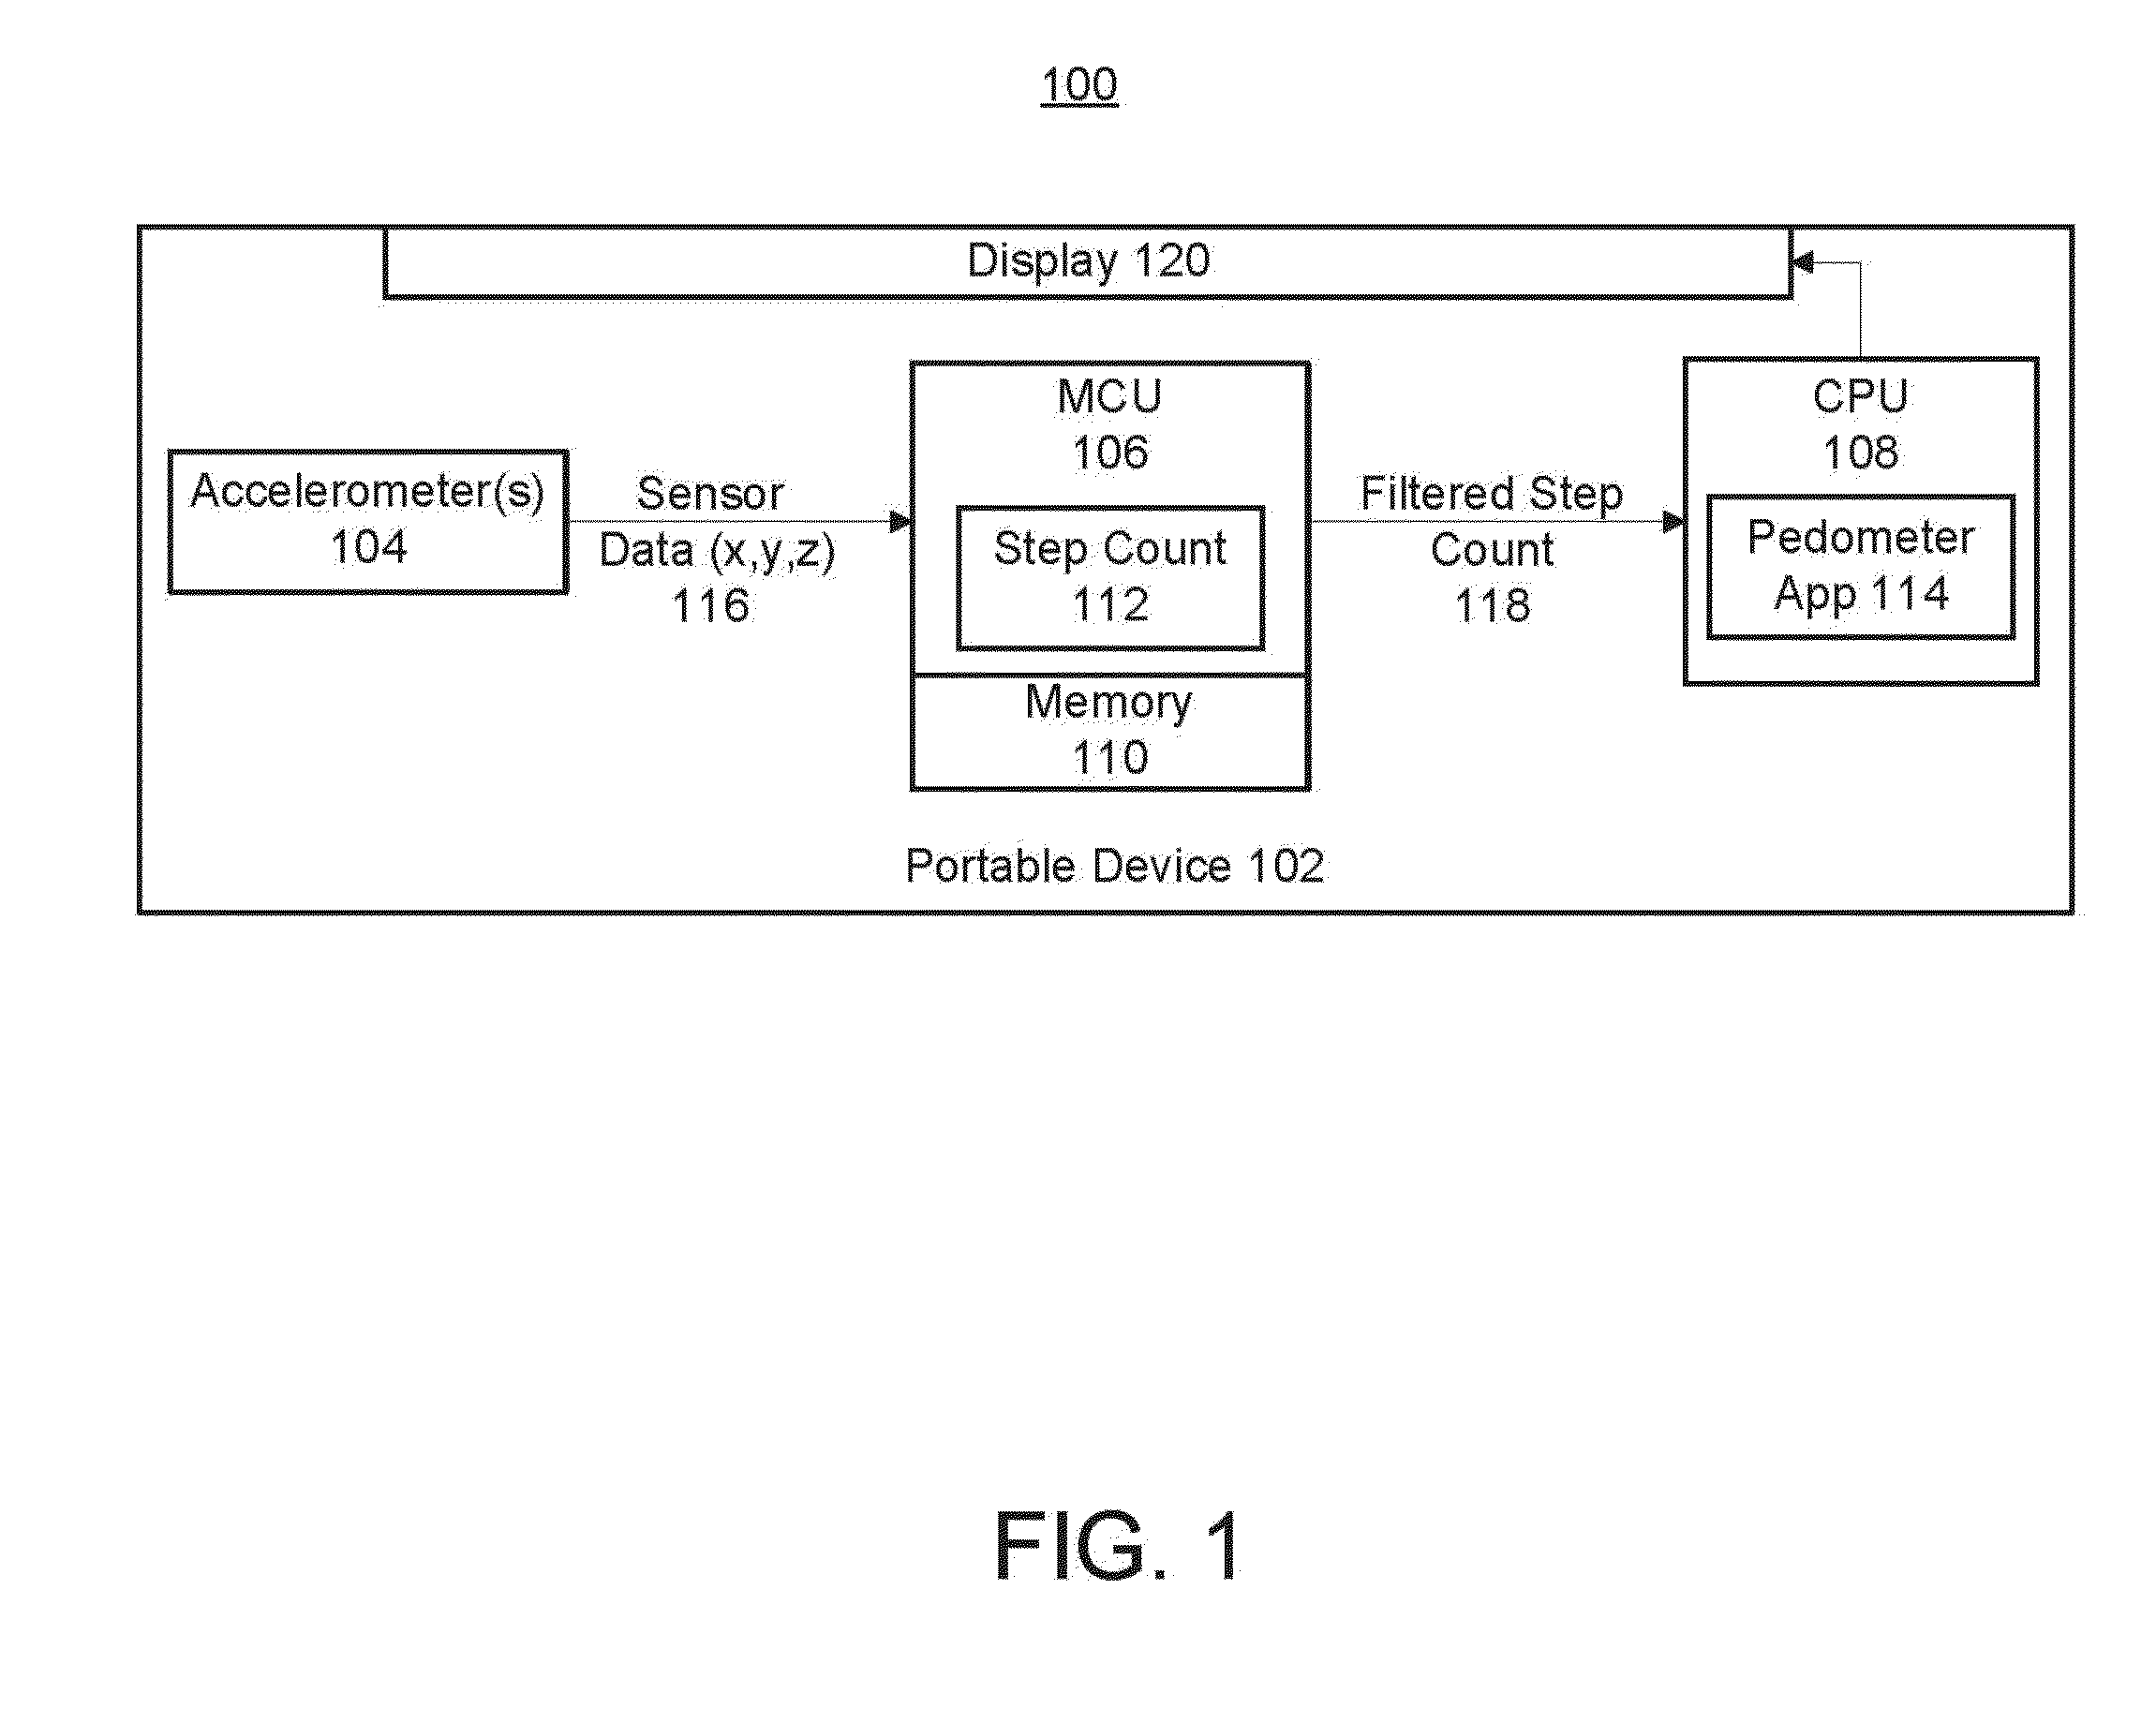 Pedometer in a low-power device